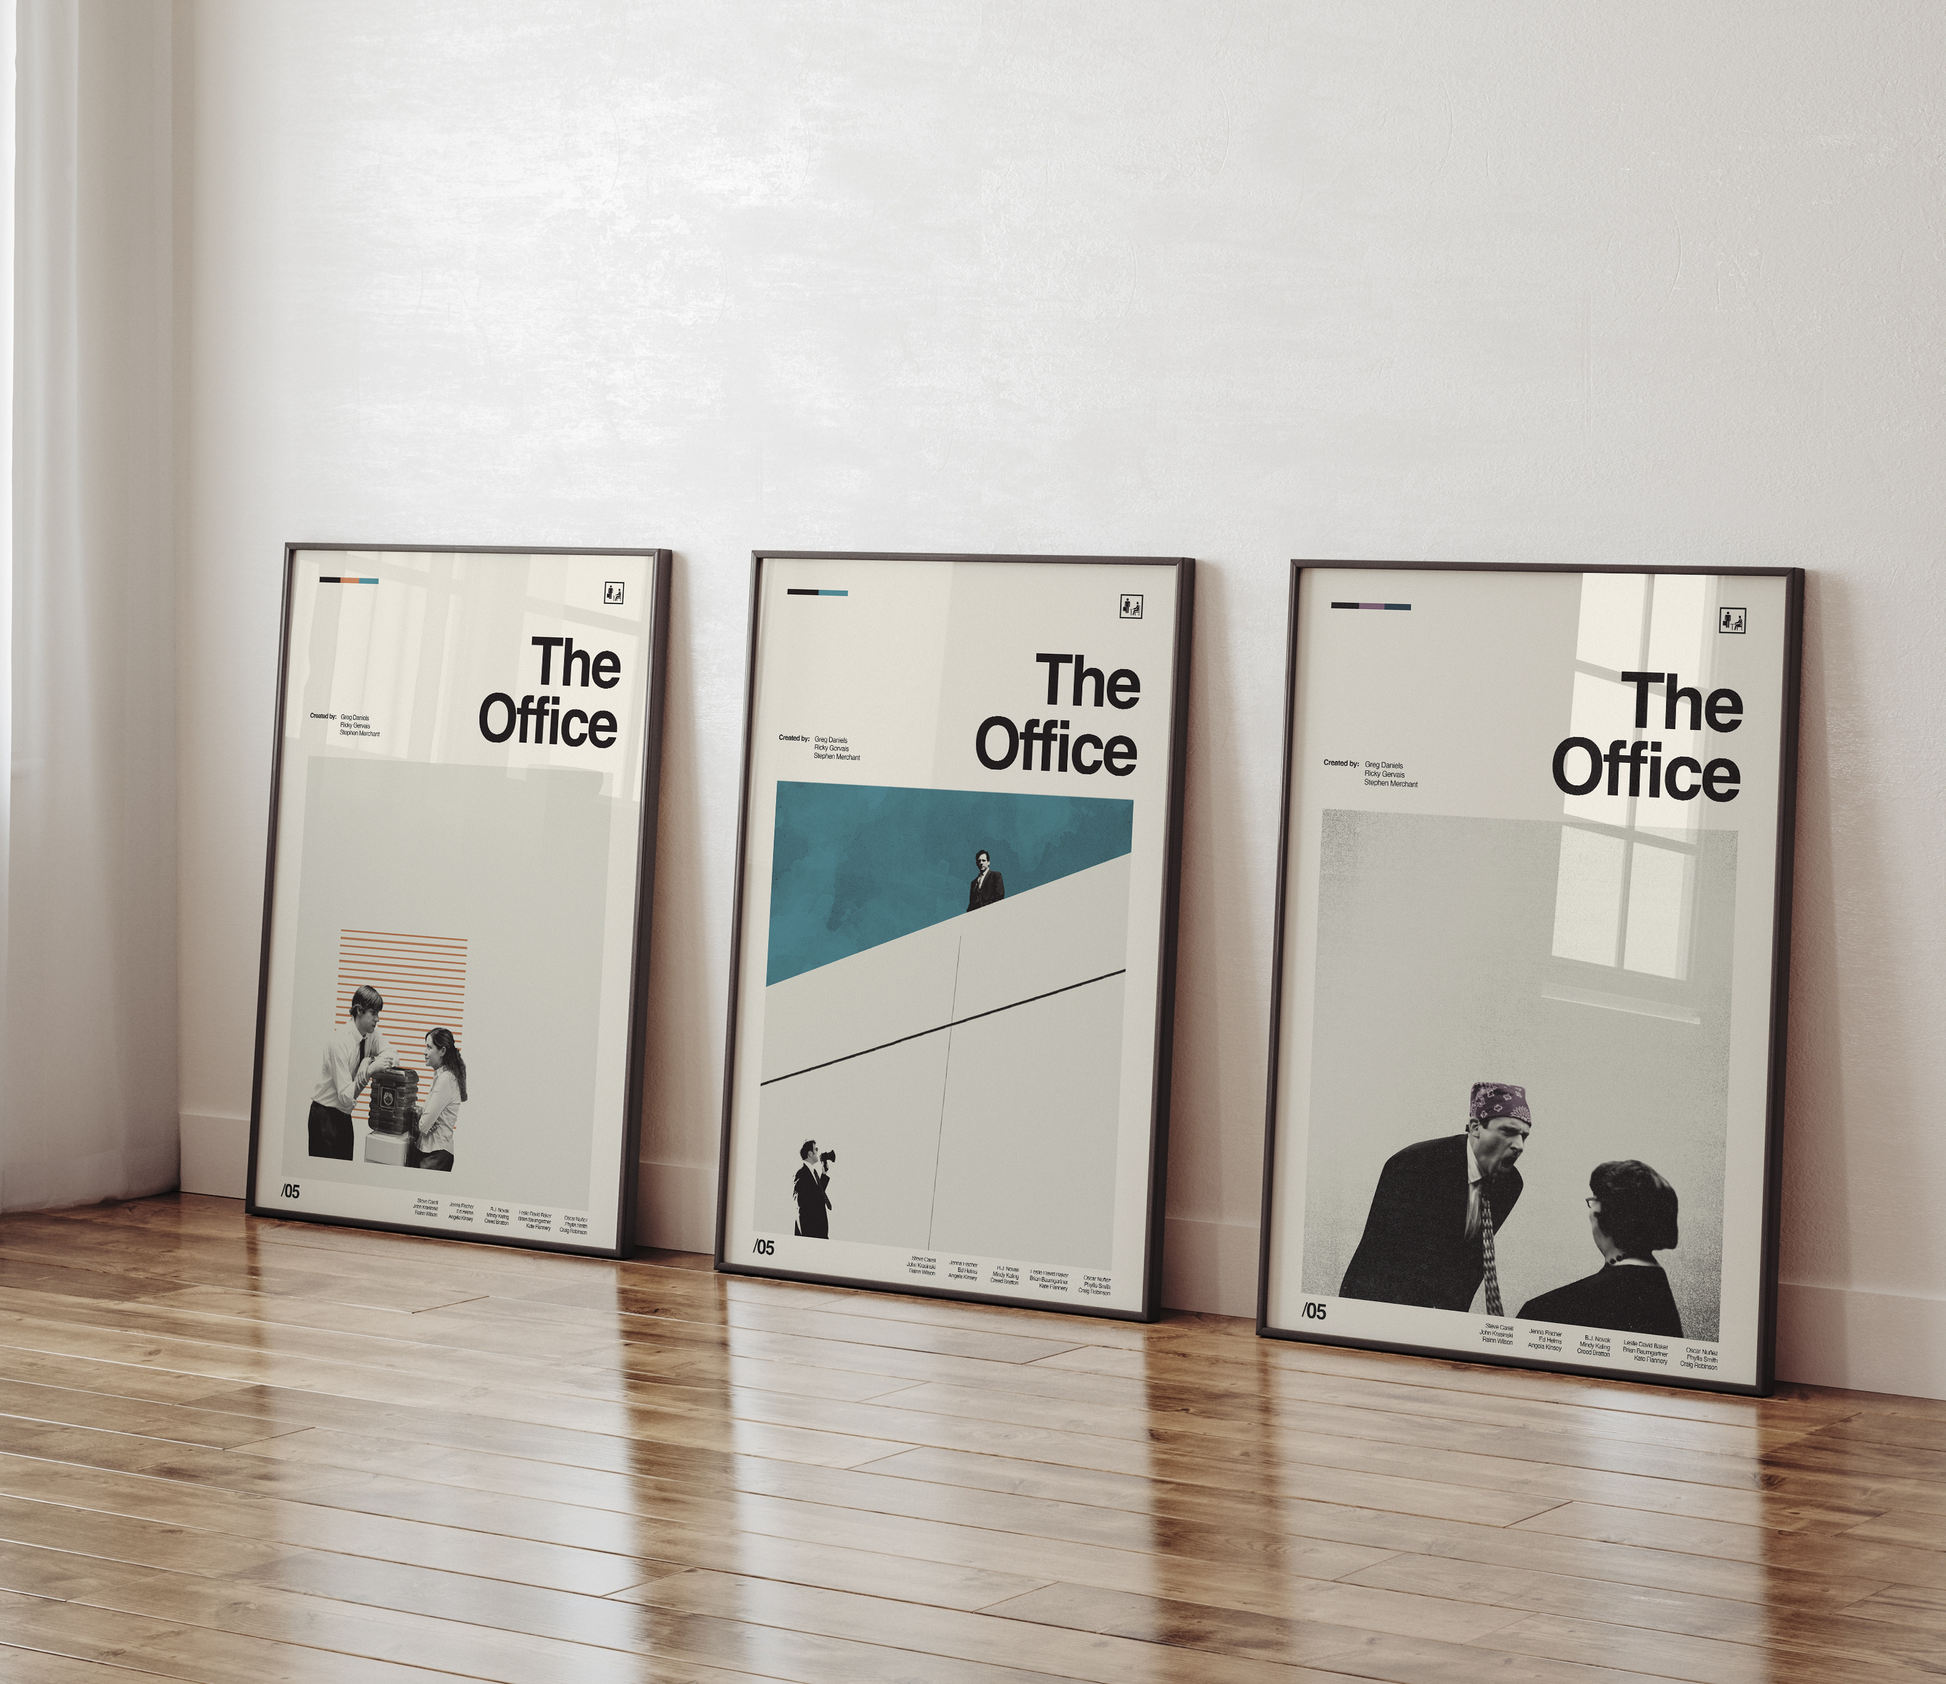 The Office Poster - The Office Merchandise ( 300GSM Premium Matte Finish  Art Paper, 13x19 inches, UNFRAMED, SELF ADHESIVE, Multicolor 2) MADE IN  INDIA Fine Art Print - Movies, Music, Pop Art